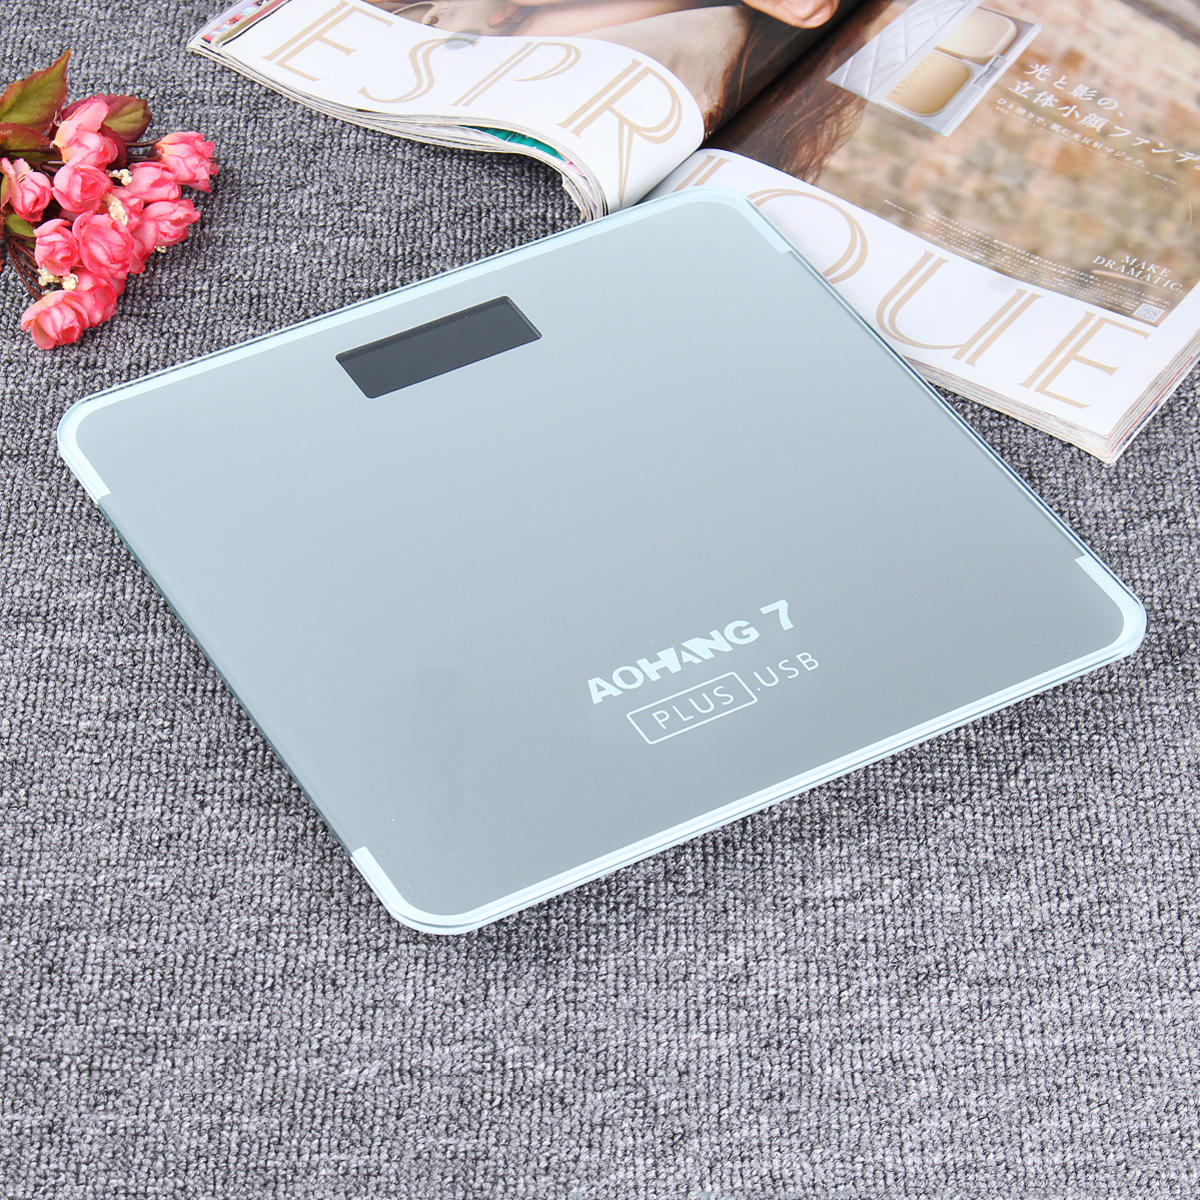 AOHANG 7 Plus USB Version 180kg LCD Electronic Digital Tempered Glass Body Weight Scale